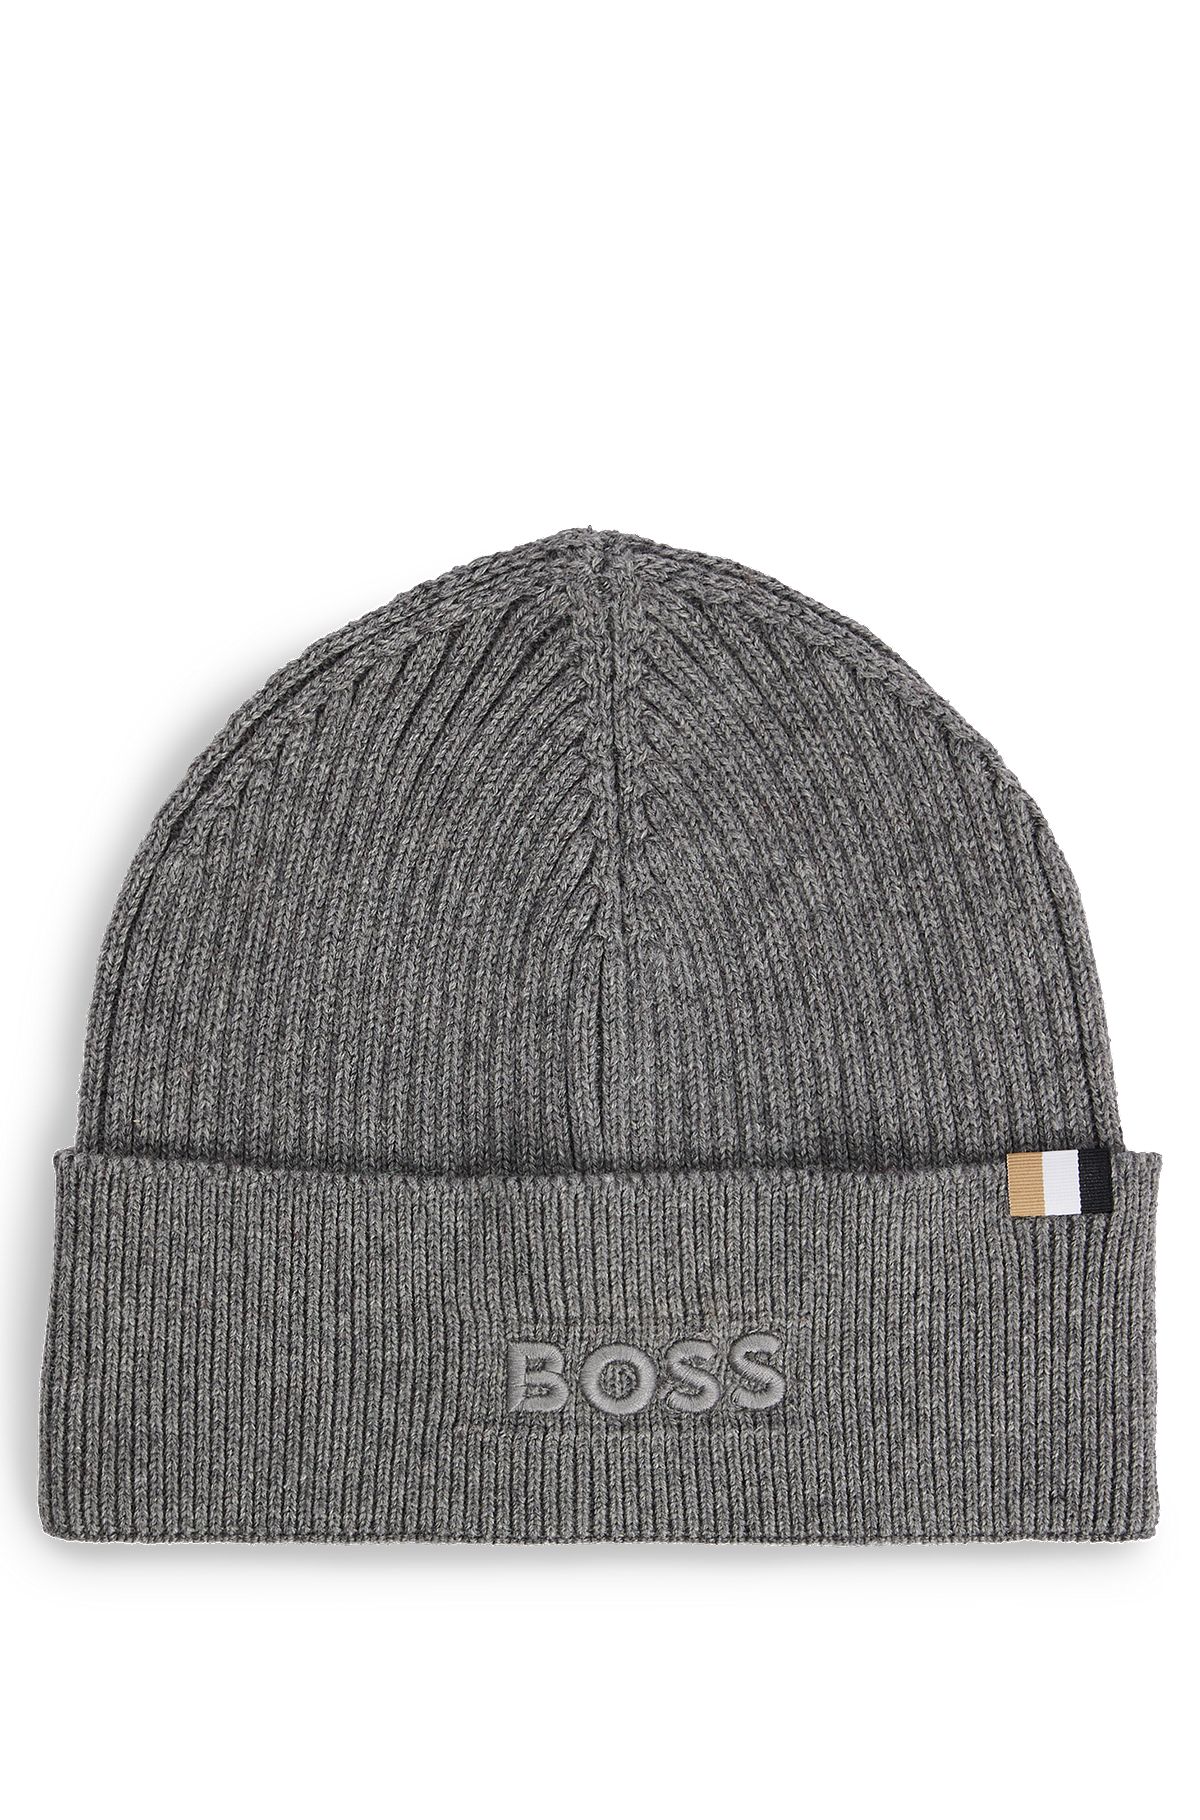 BOSS - Embroidered-logo beanie hat in cotton and wool